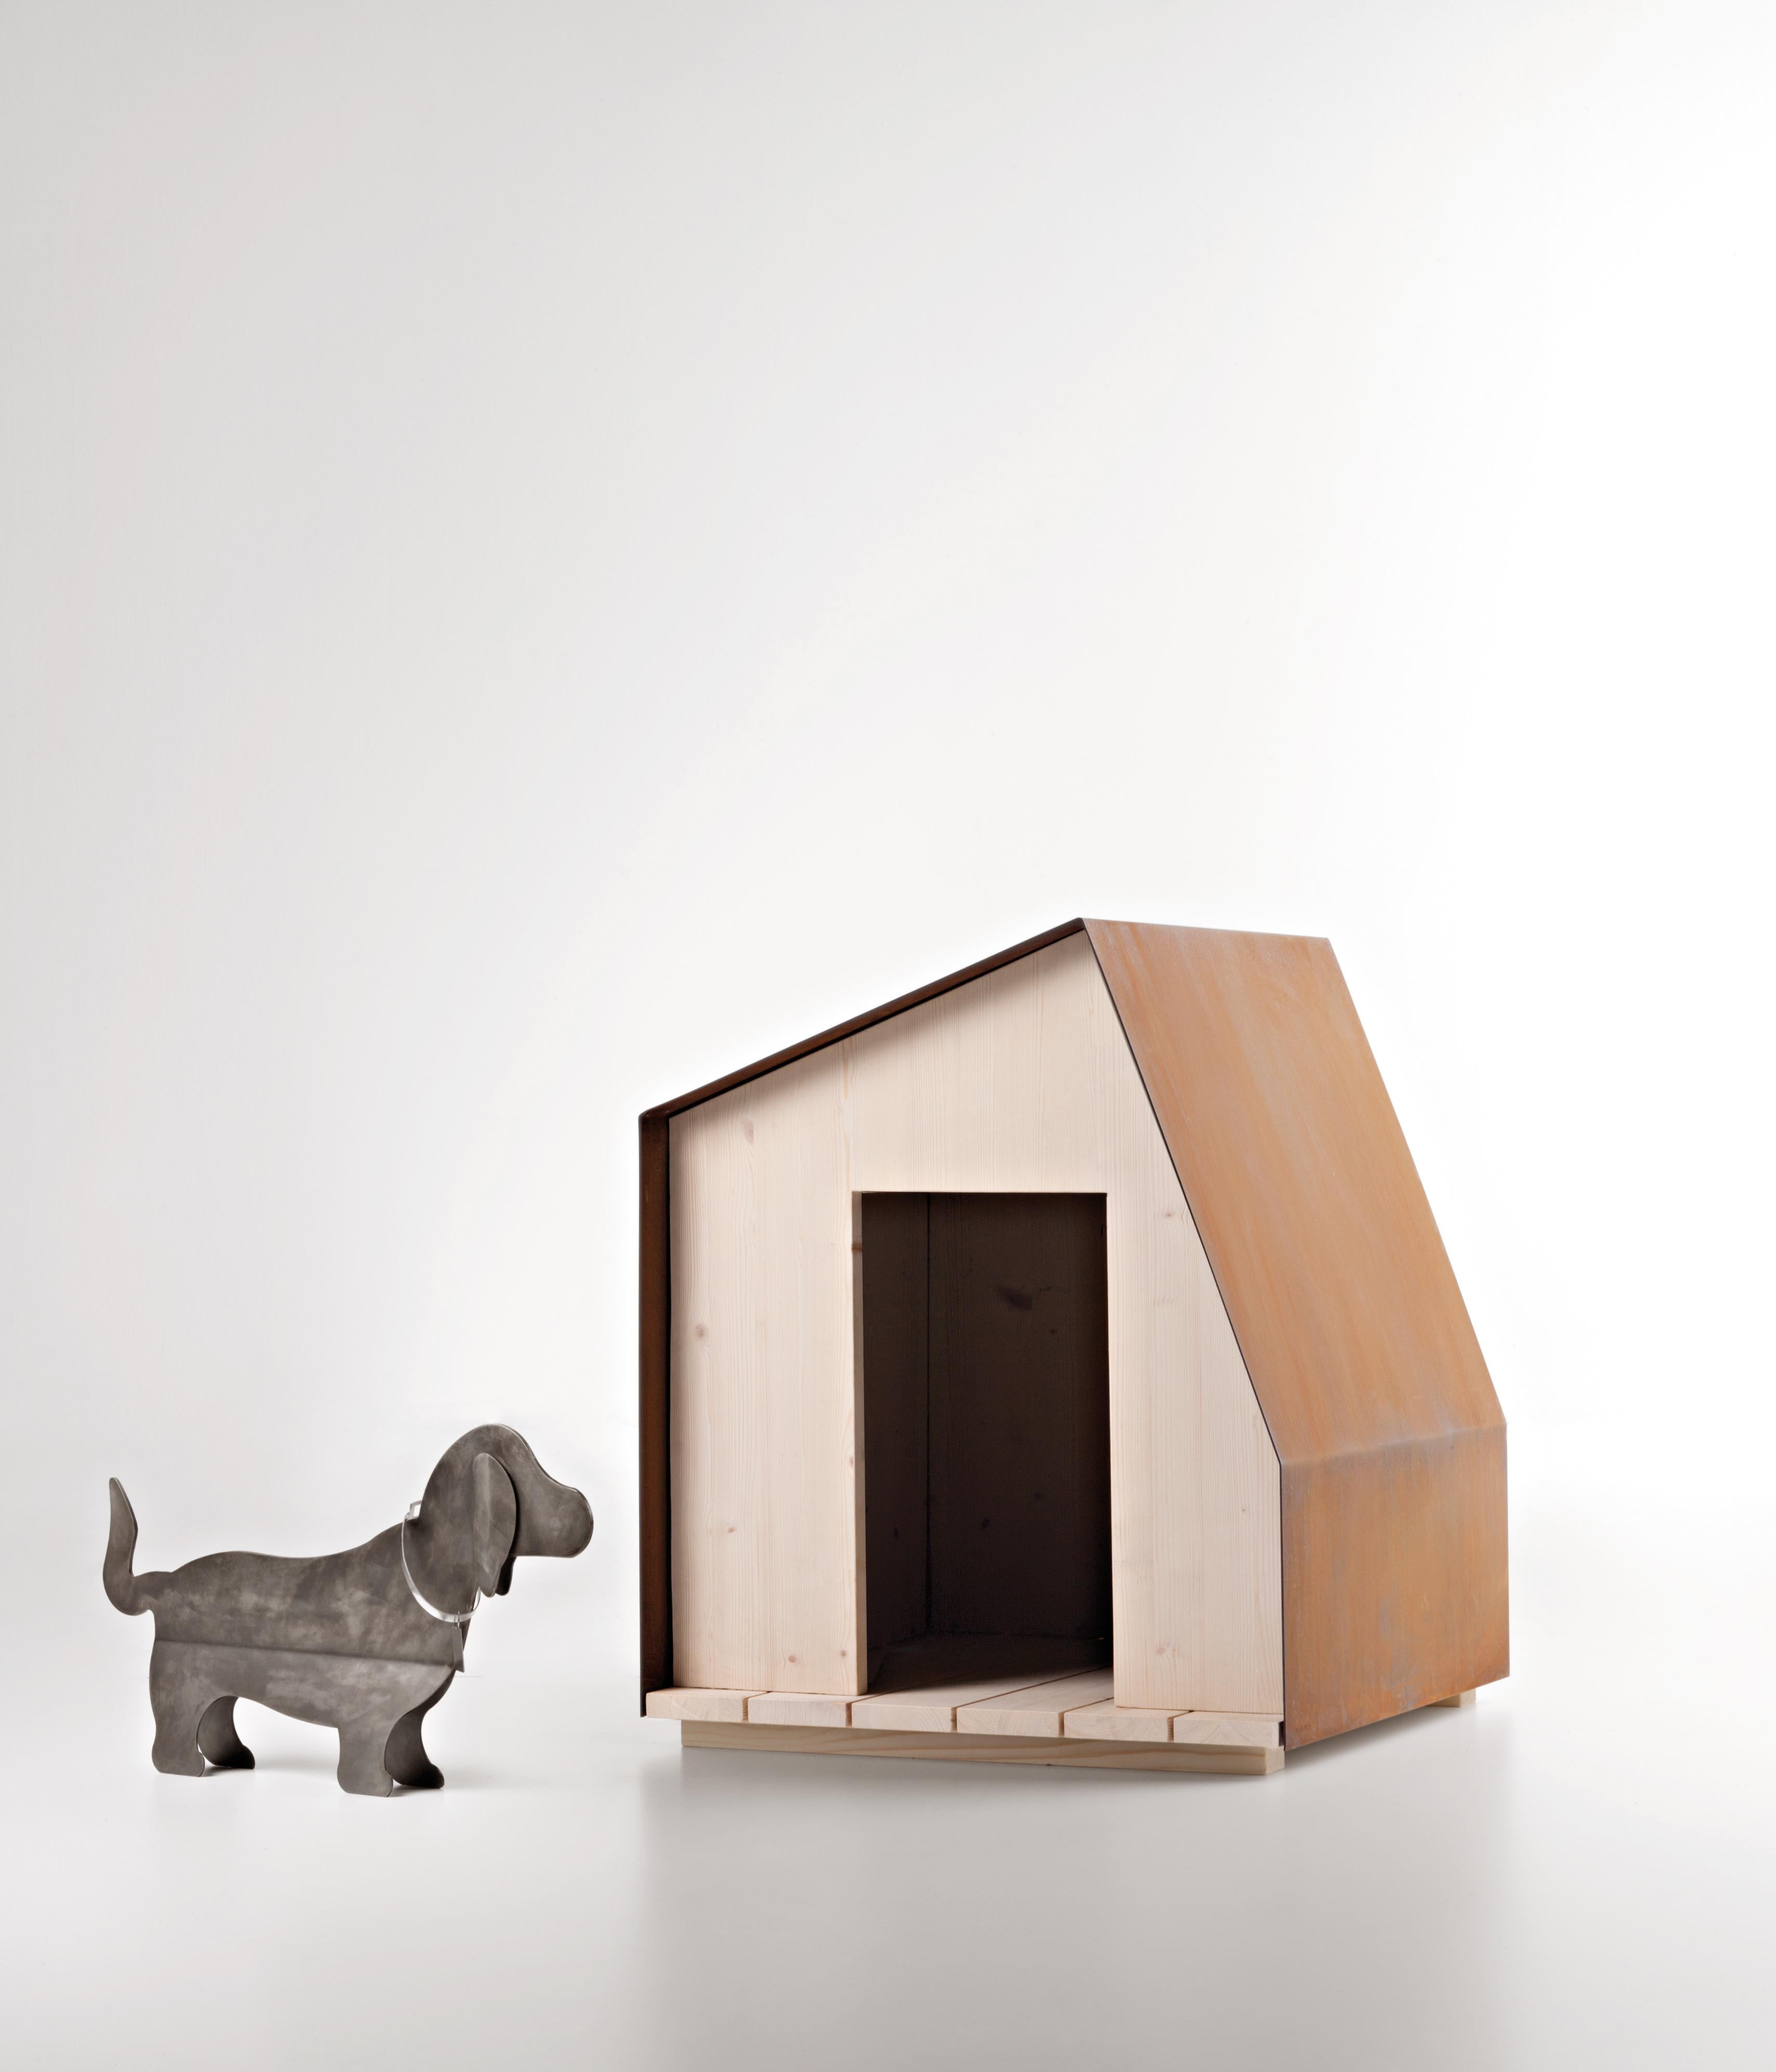 Dog House n°1 reinvents homes for our furry friends. Created as a version of Cottage n°1, it offers a conceptual revisitation of traditional kennels, focusing on the intrinsic characteristics of the building materials, which lend functionality and